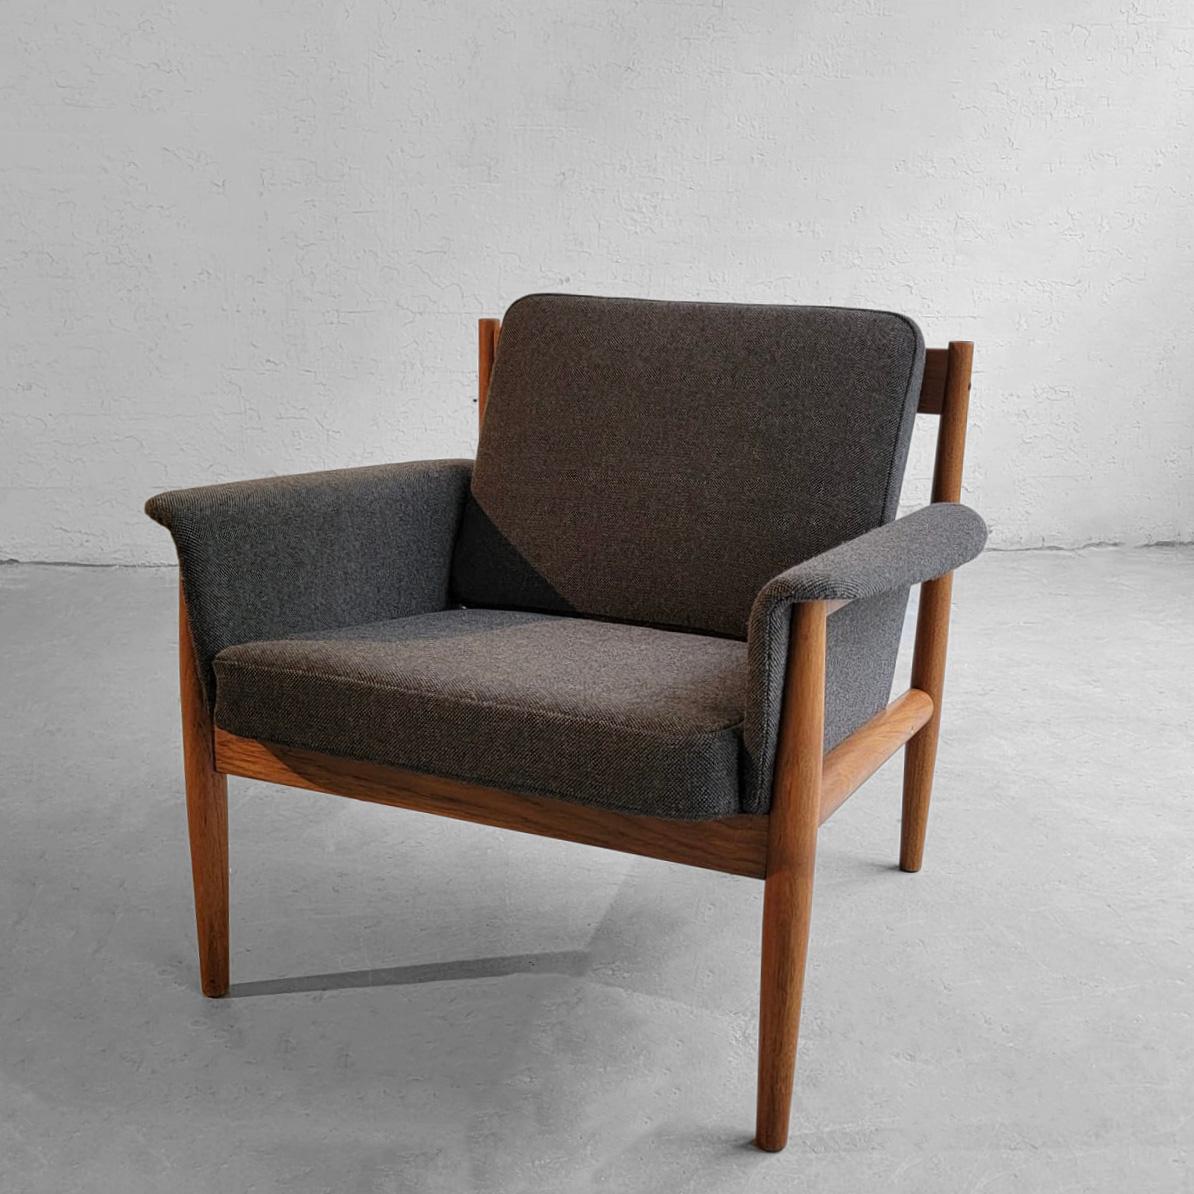 Scandinavian modern, lounge chair by Grete Jalk for France & Son features a teak frame with upholstered seat and back removeable cushions and covered arms in gray wool blend.